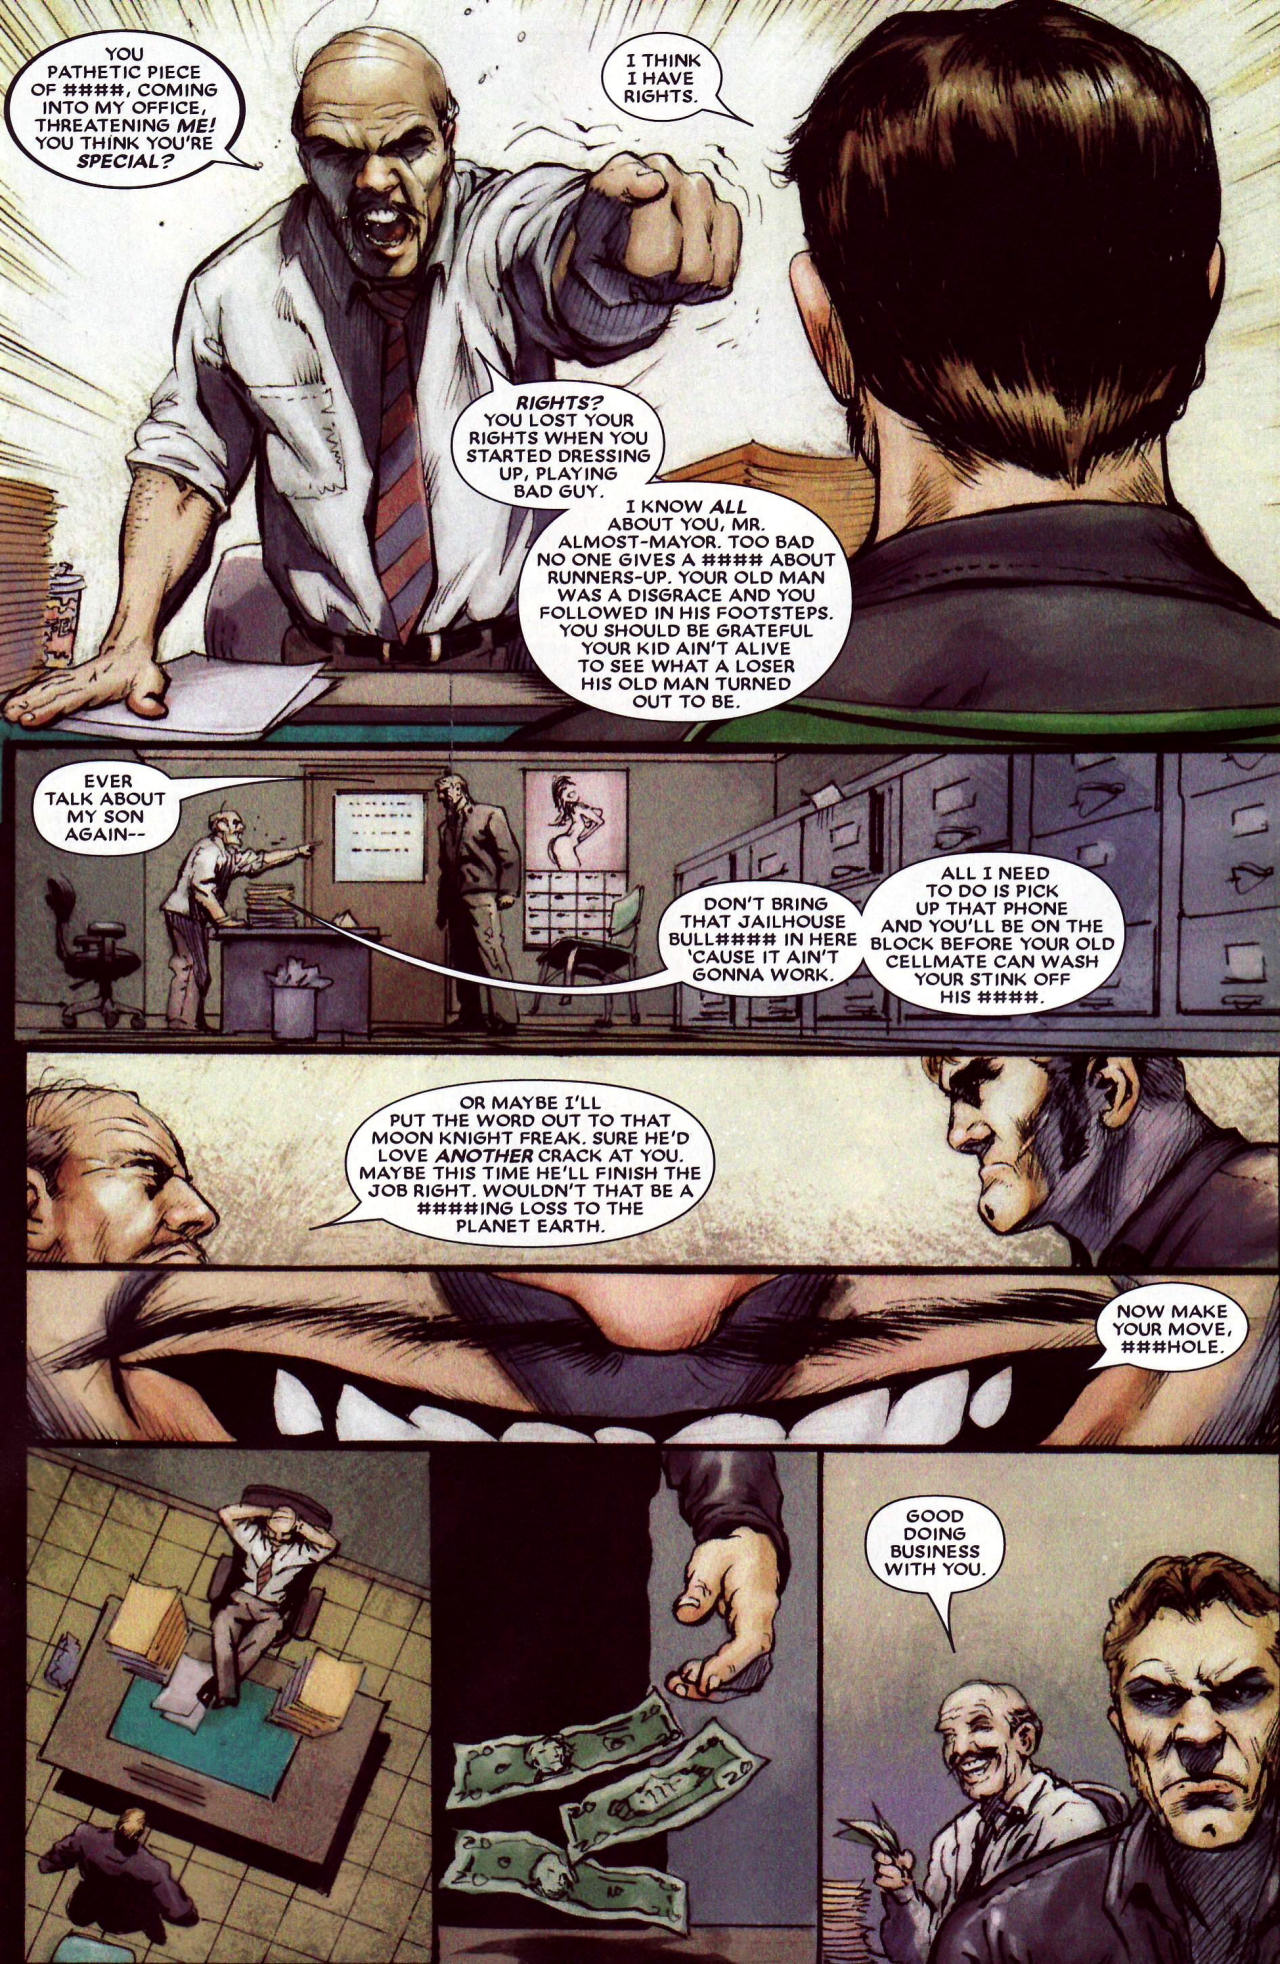  Moon Knight #15 - God And Country, Chapter Two